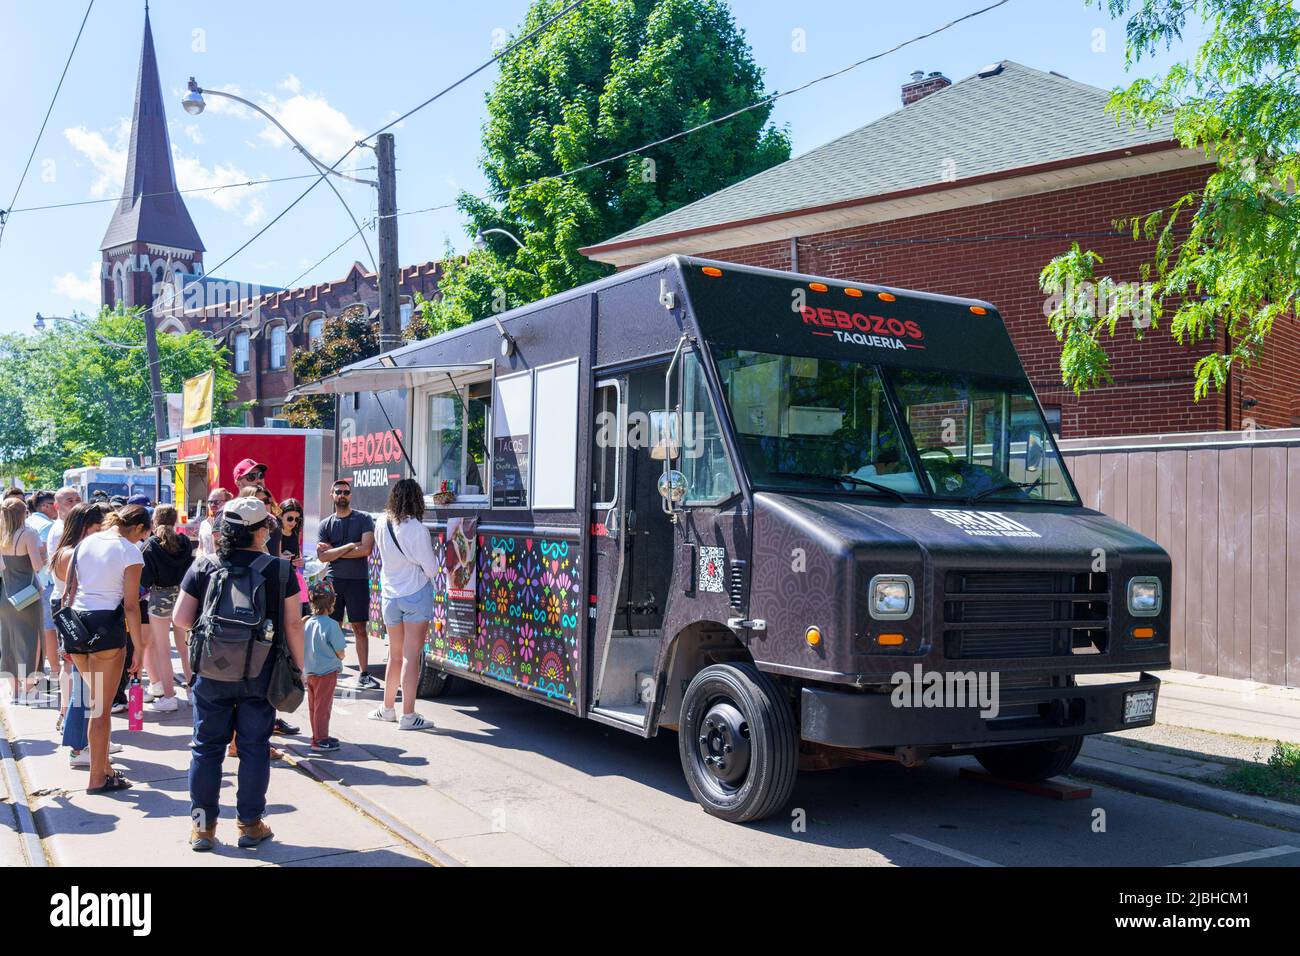 People lining-up in a food truck of Rebozo Taqueria during the Do West Festival. Stock Photo